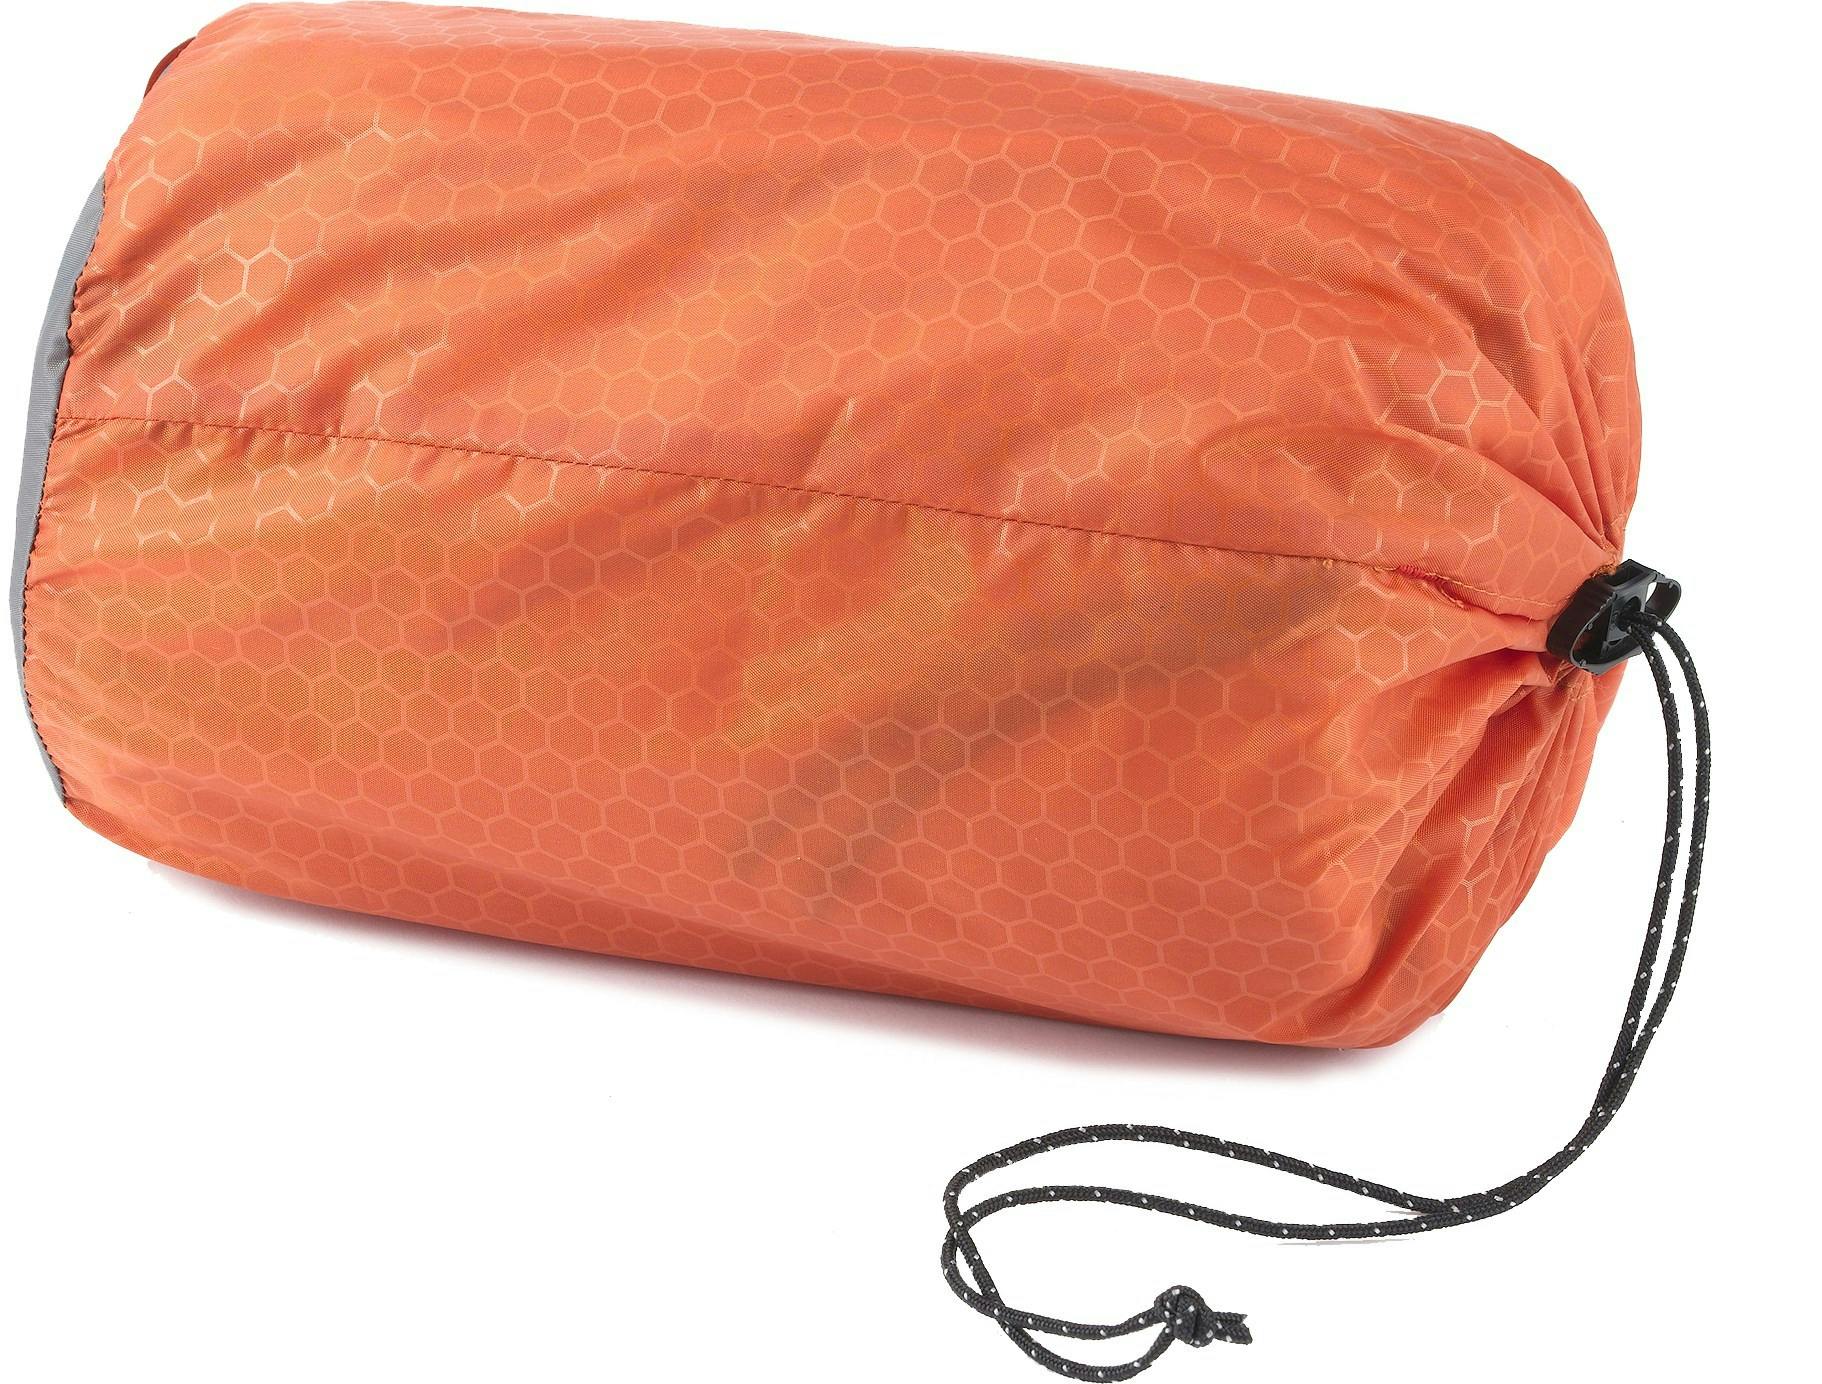 Exped SynMat XP 7 Sleeping Pad